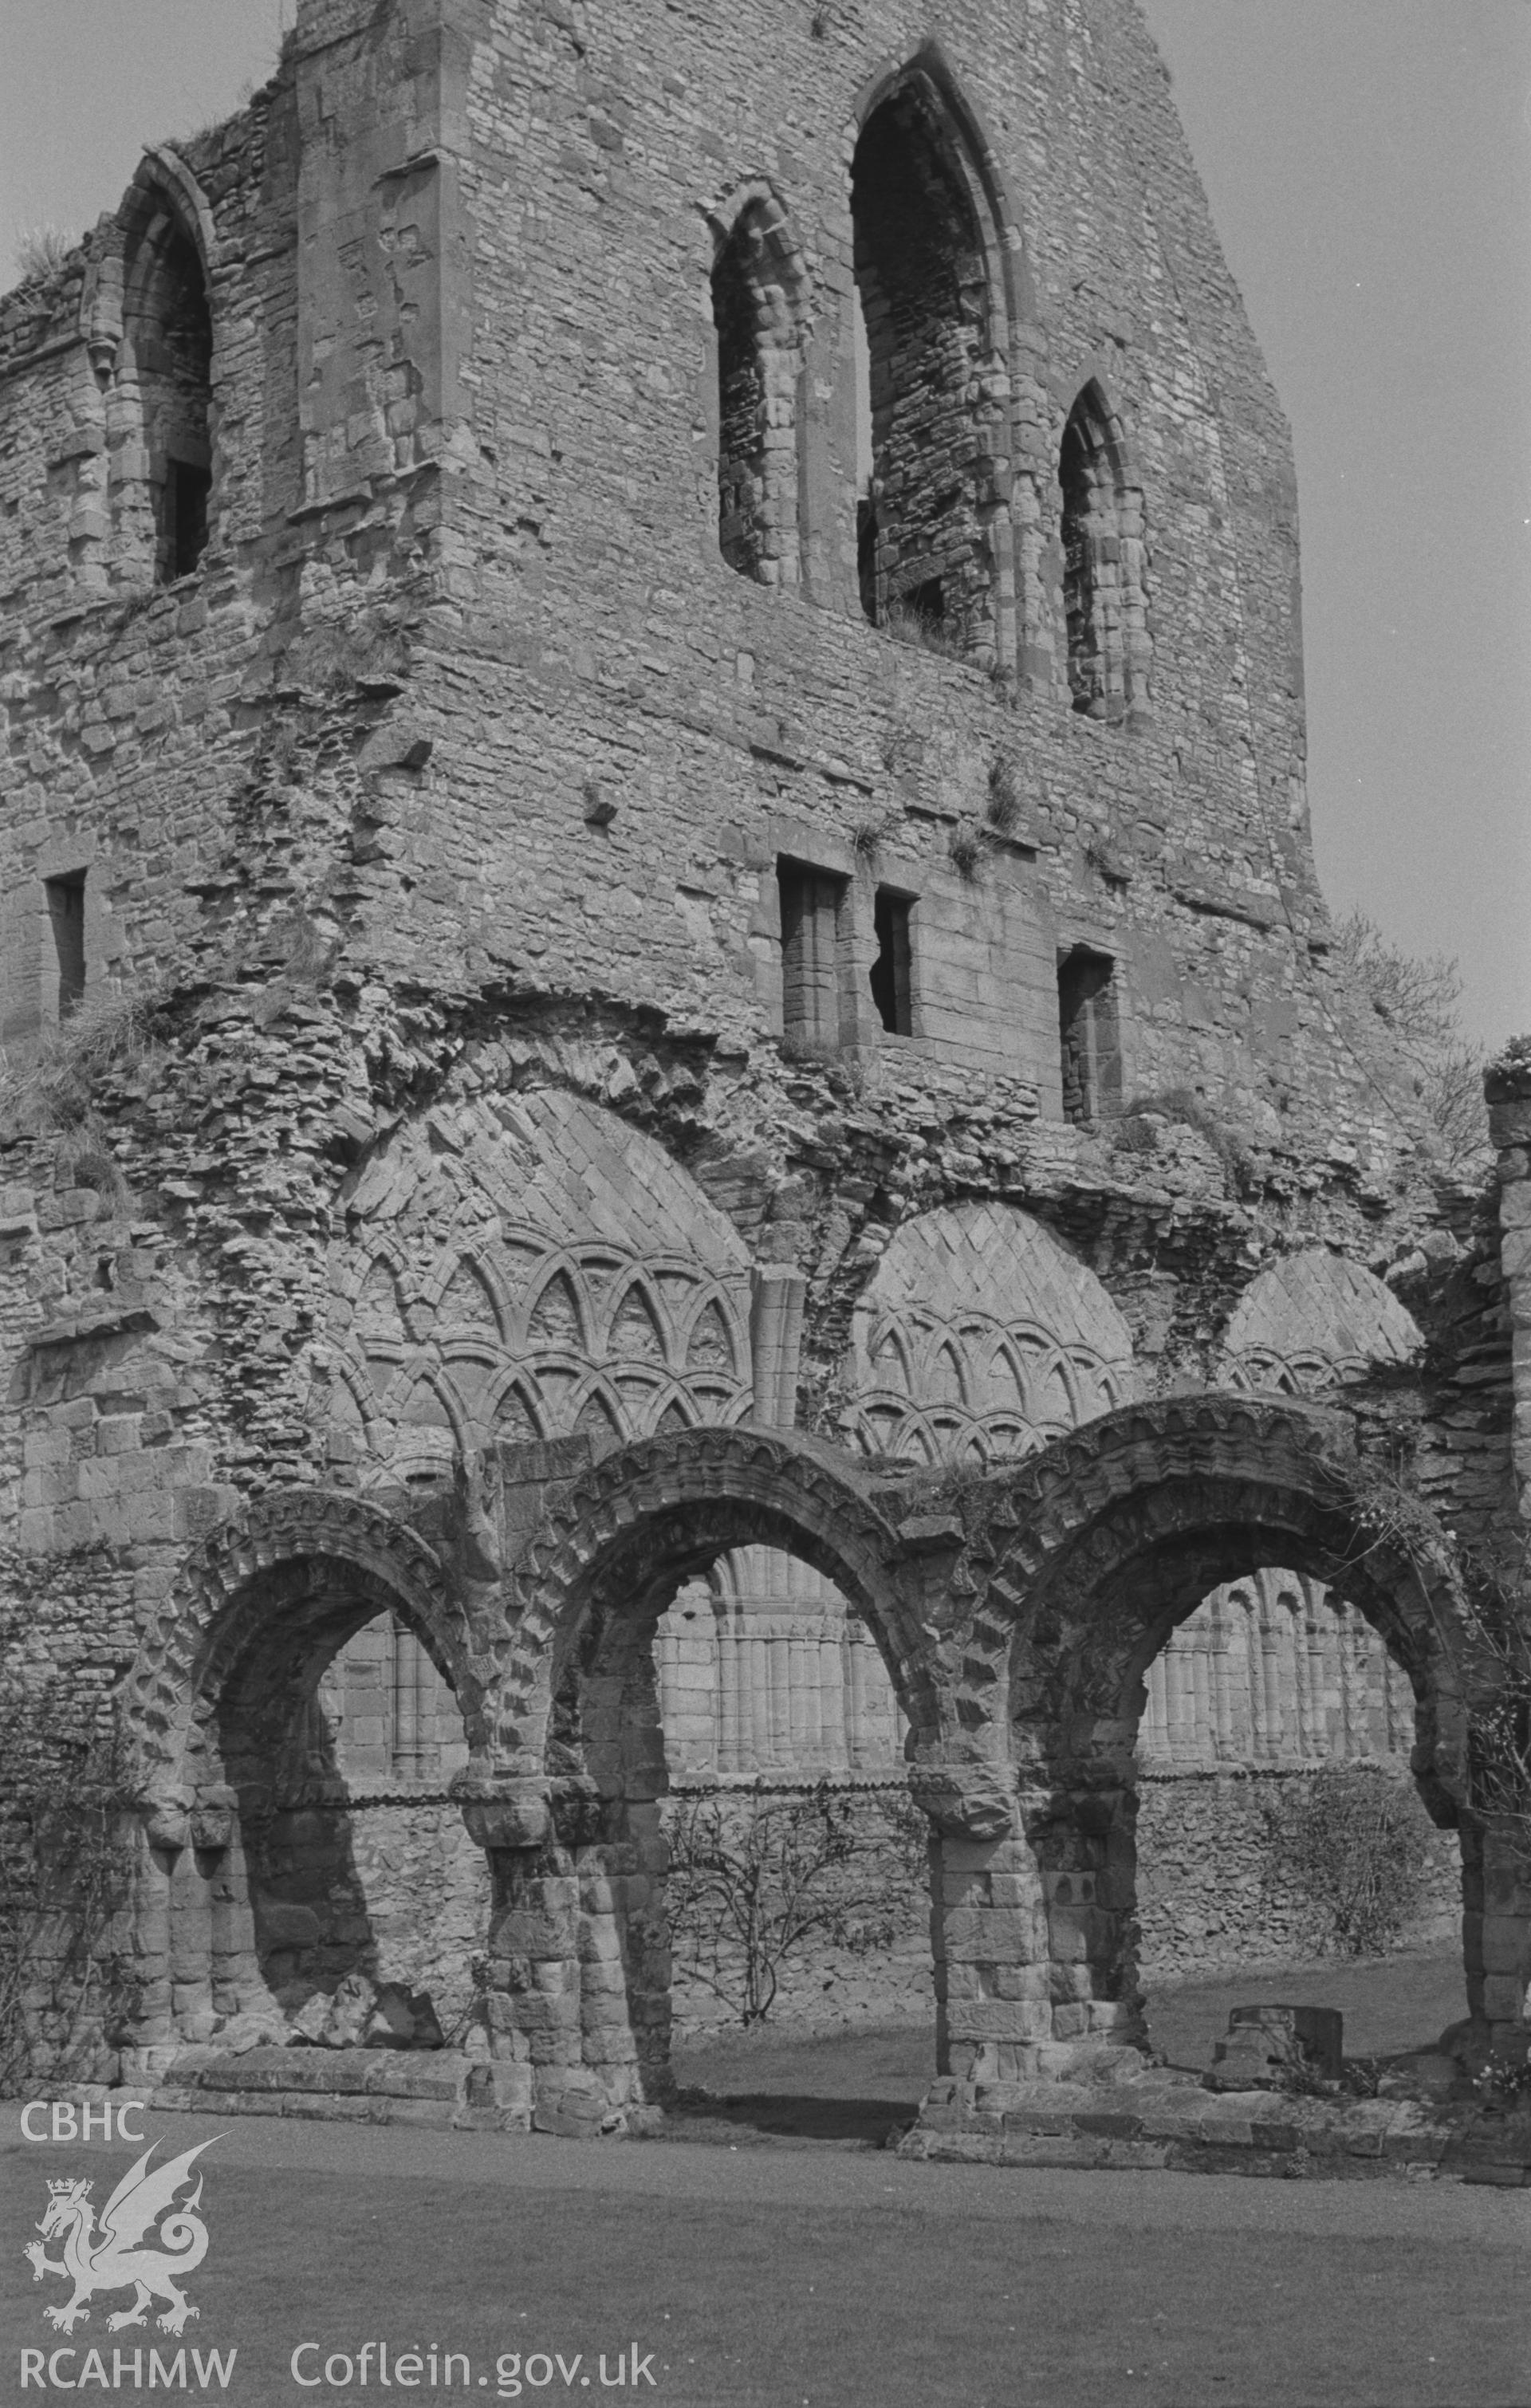 Black and White photograph showing Wenlock Priory, Shropshire.